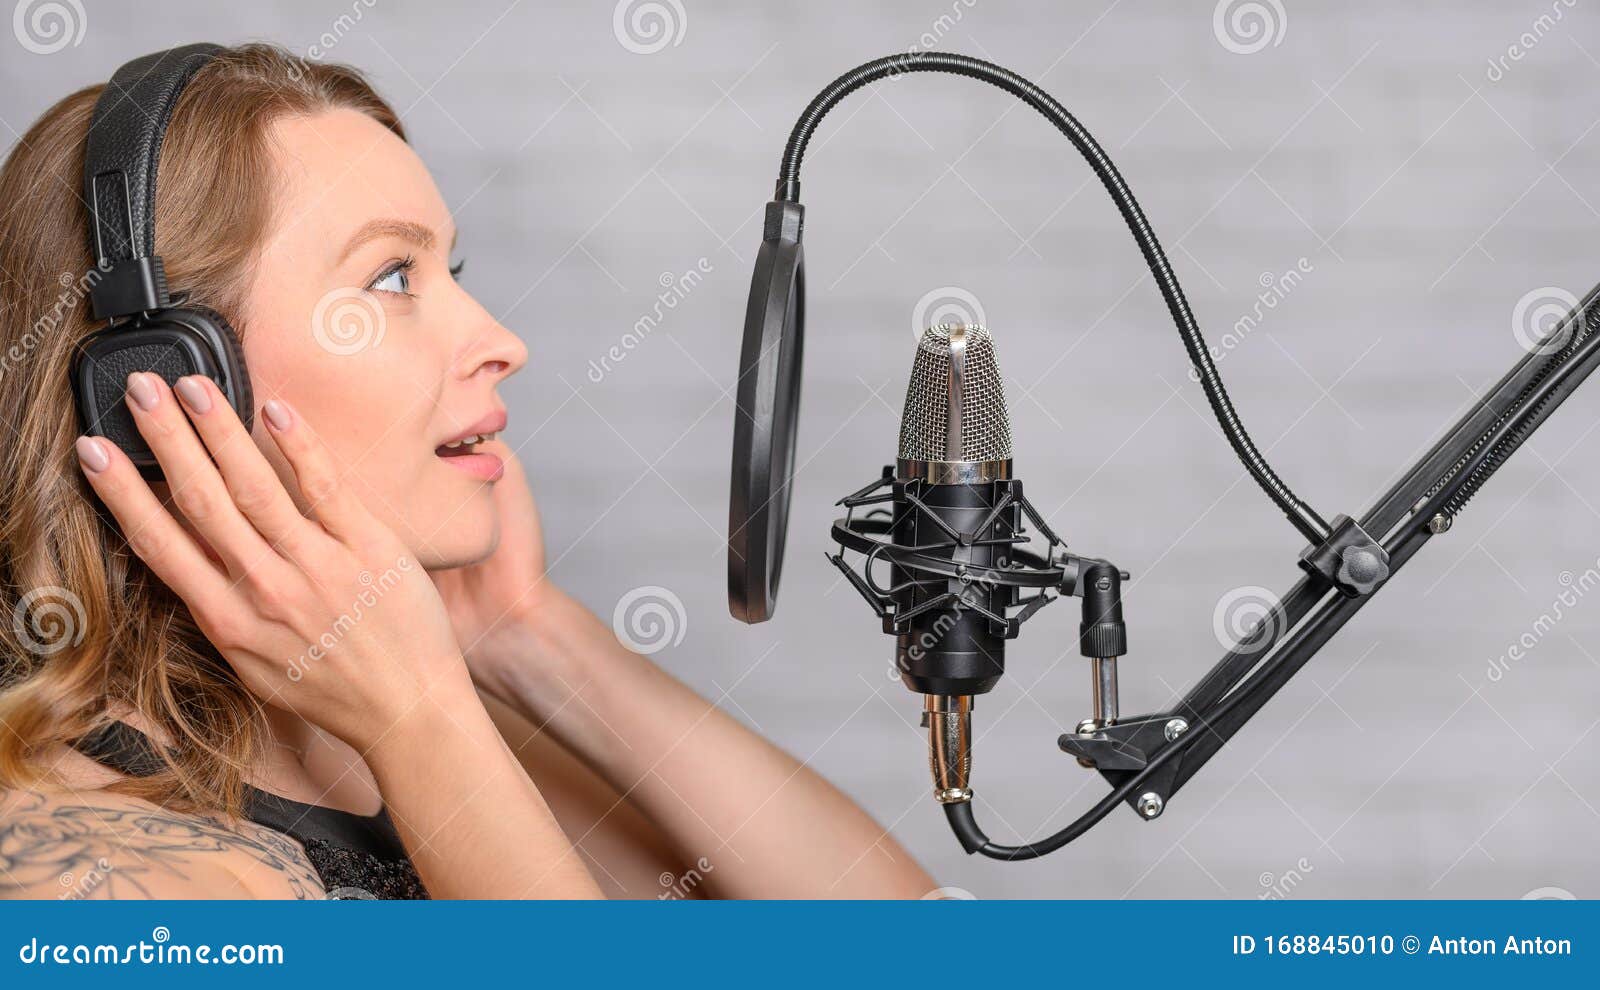 singer with a tattoo sings rock music in the studio into a microphone, musician and treble vocals